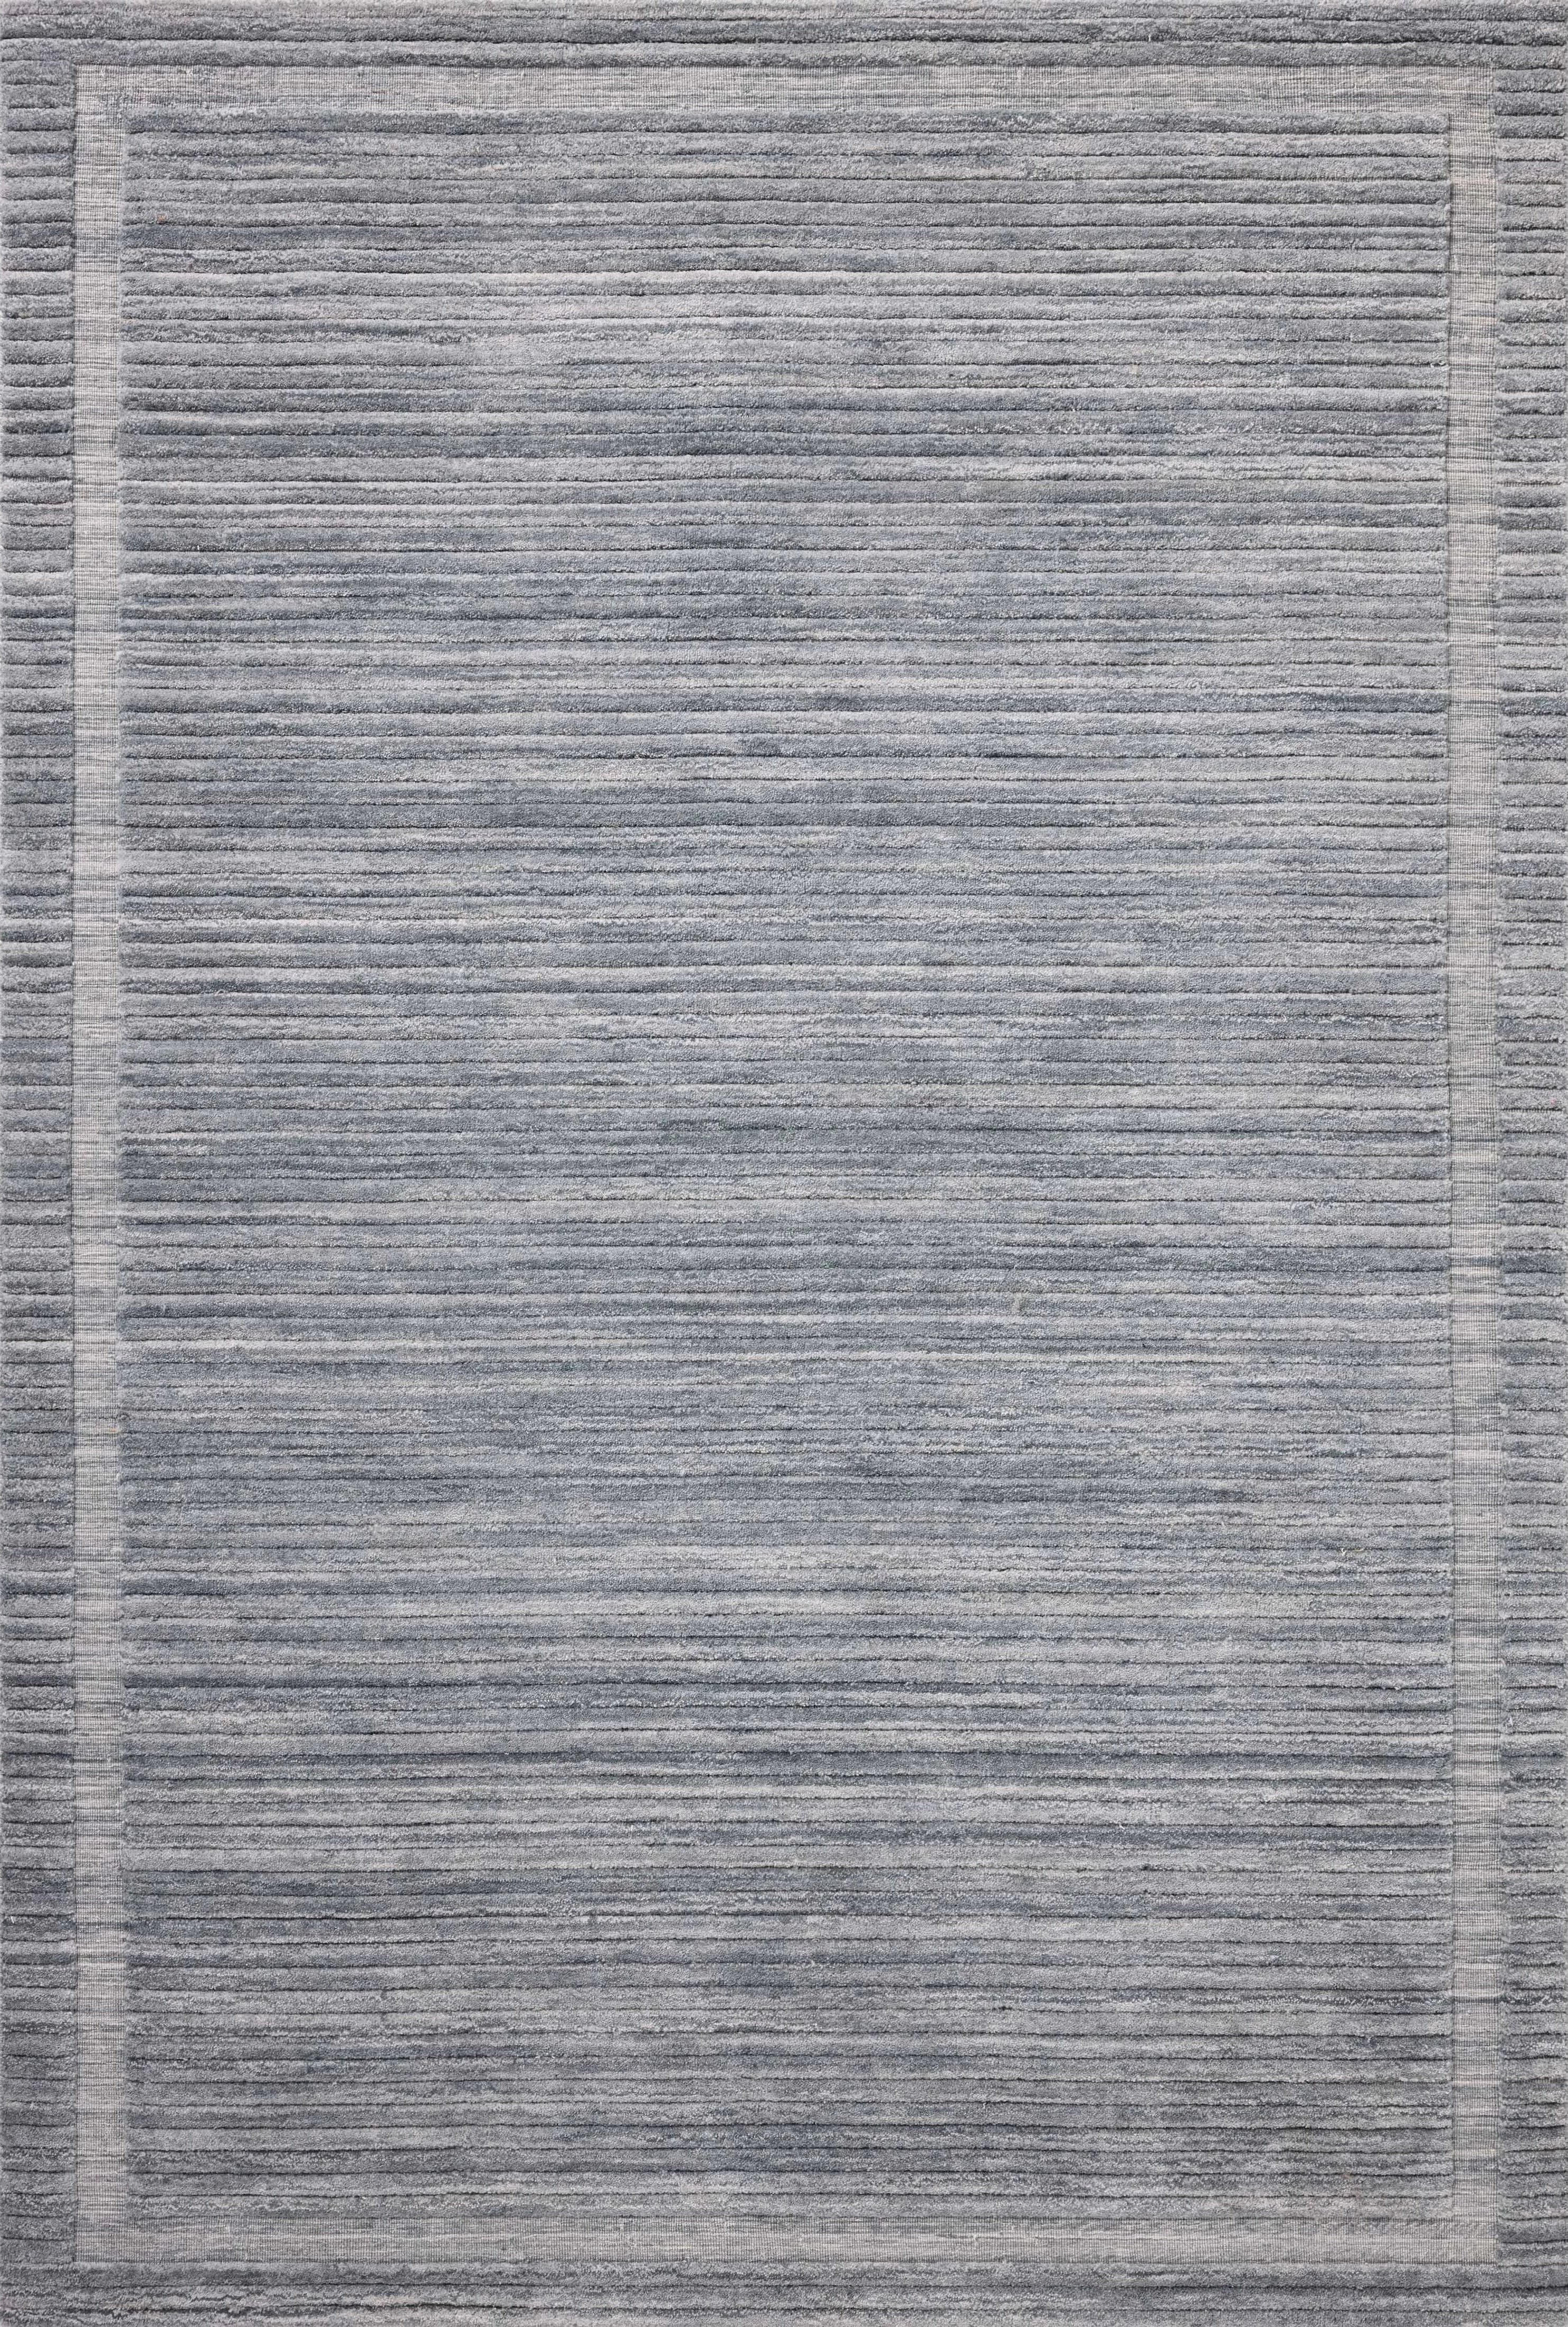 Irresistible to walk upon, the Dana Denim Rug by Brigette Romanek x Loloi has a high-low texture that alternates between a subtly shaggy pile and a soft base. Horizontal broken stripes give the area rug a fresh and energized structure, while a finish of fringe along the edges accentuates its sense of movement. Amethyst Home provides interior design, new home construction design consulting, vintage area rugs, and lighting in the Portland metro area.